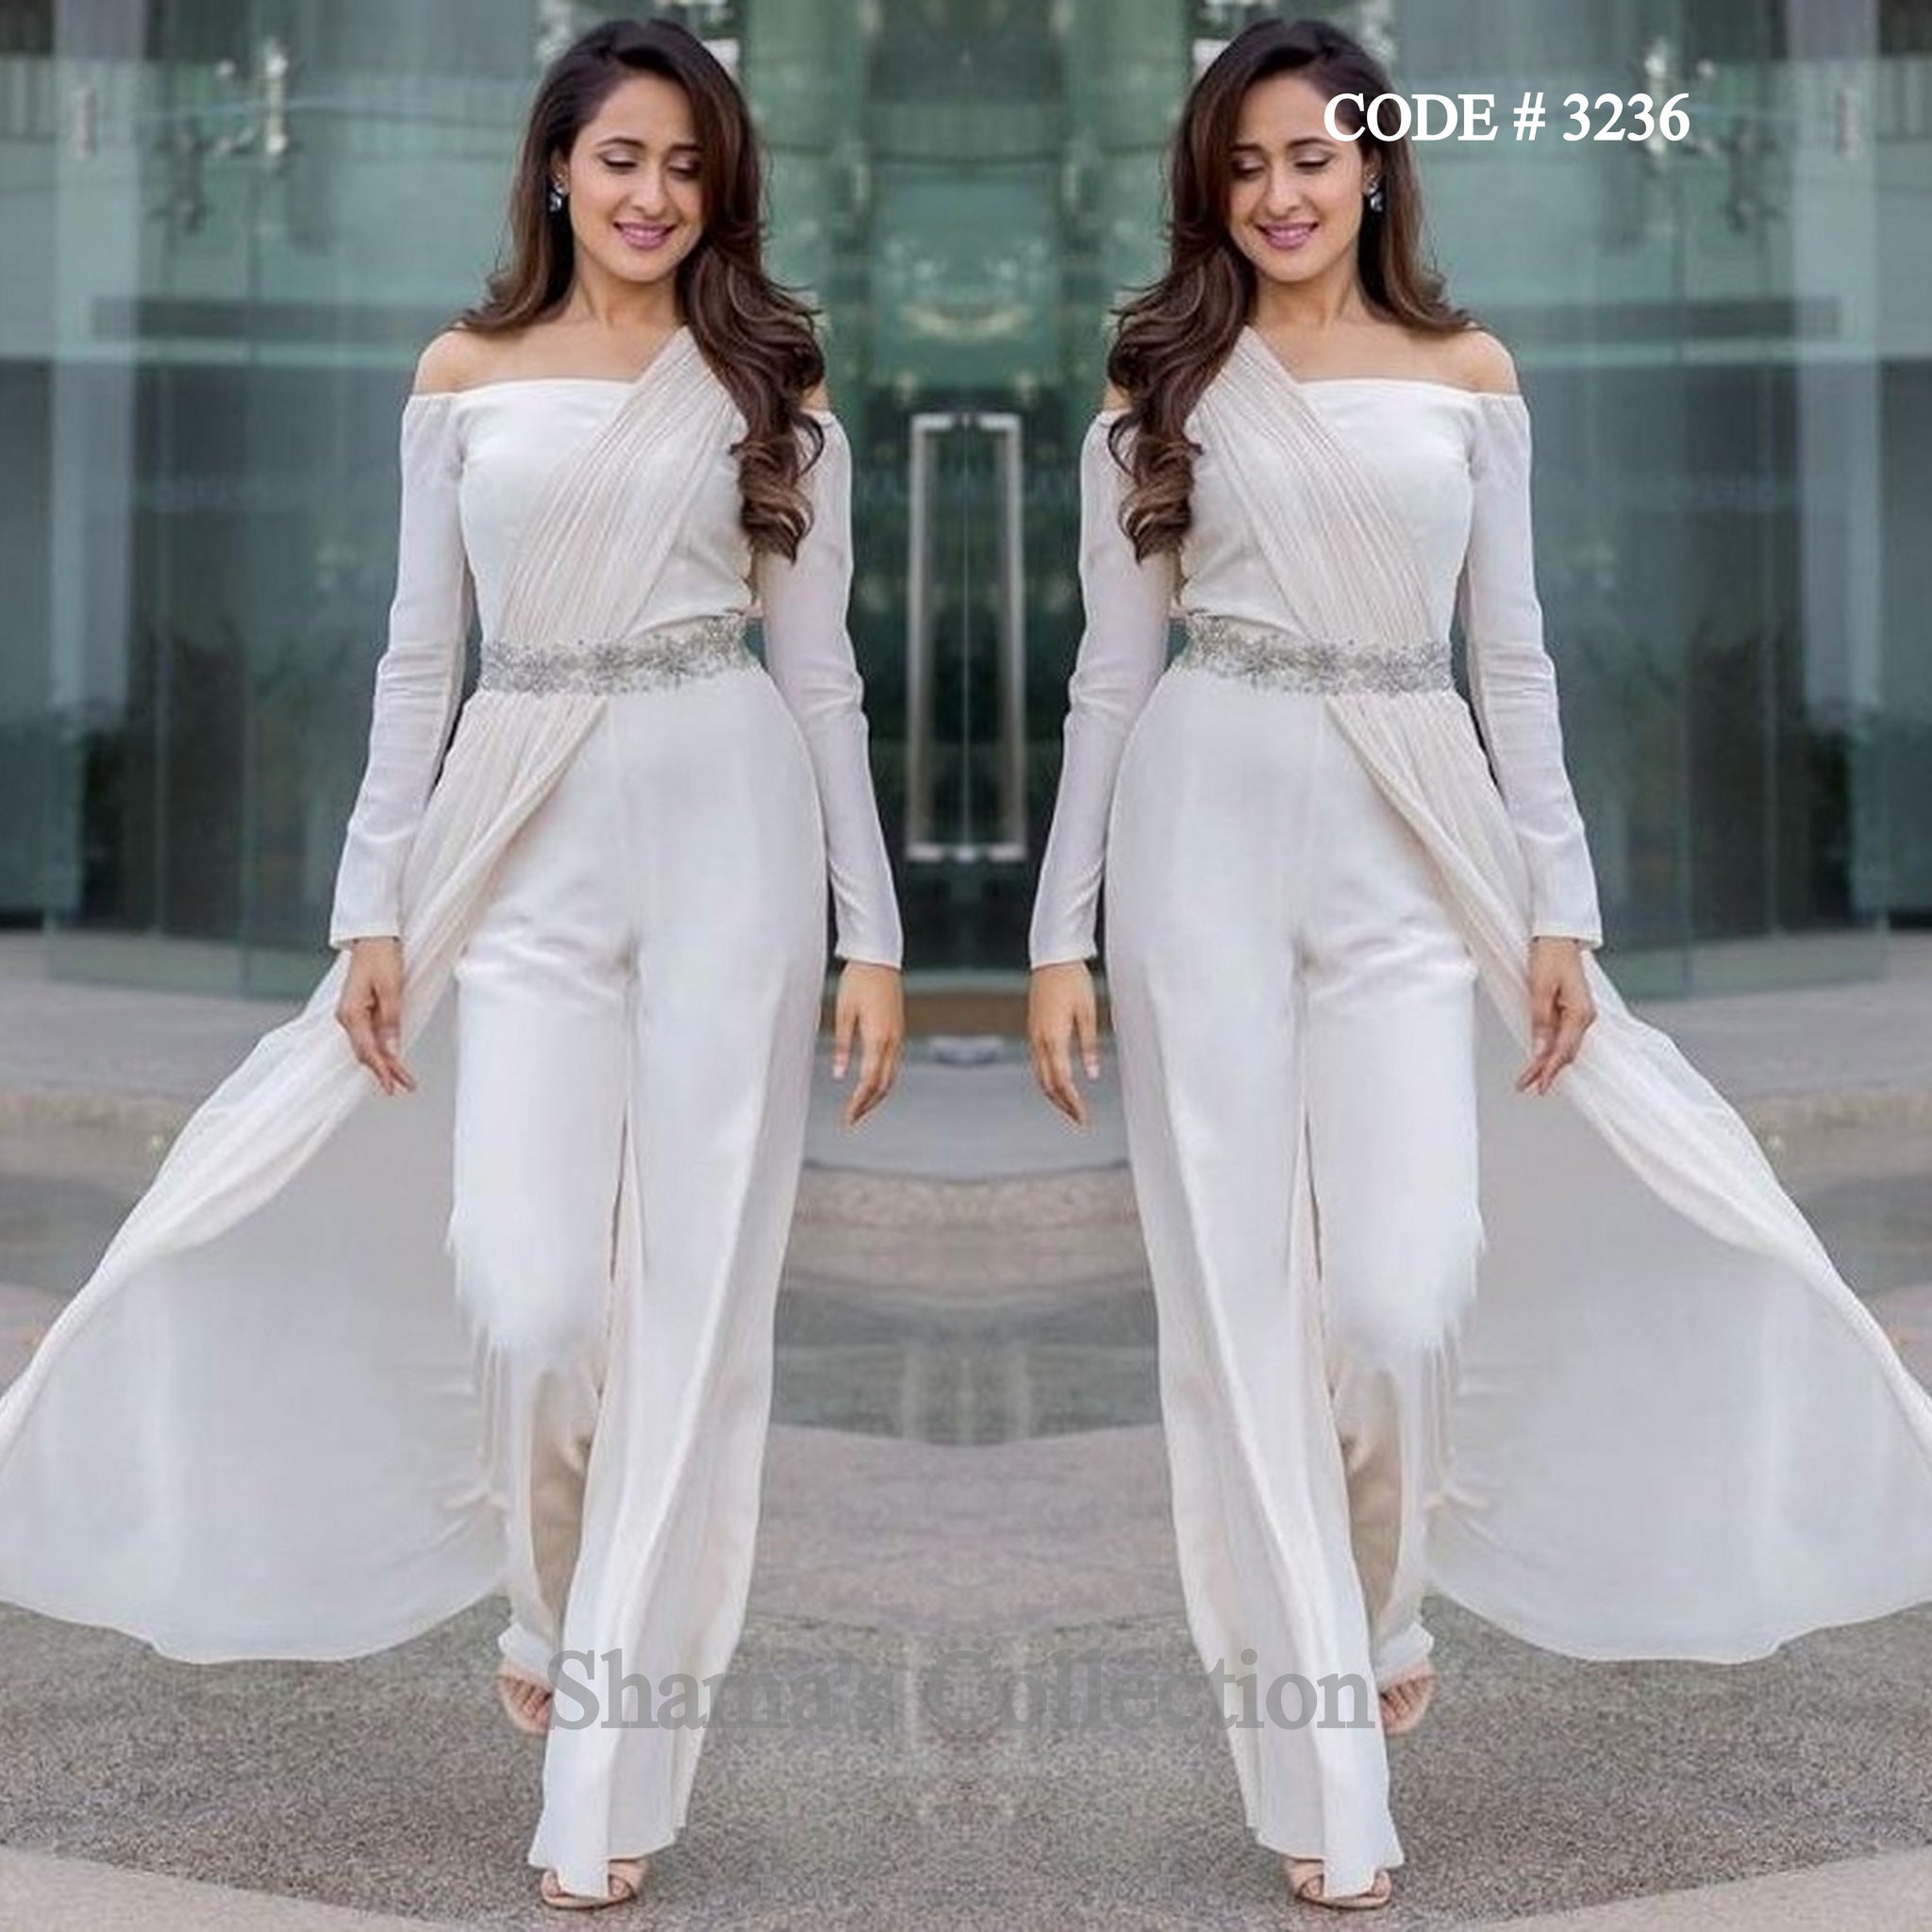 Share 82+ jumpsuit saree gown latest